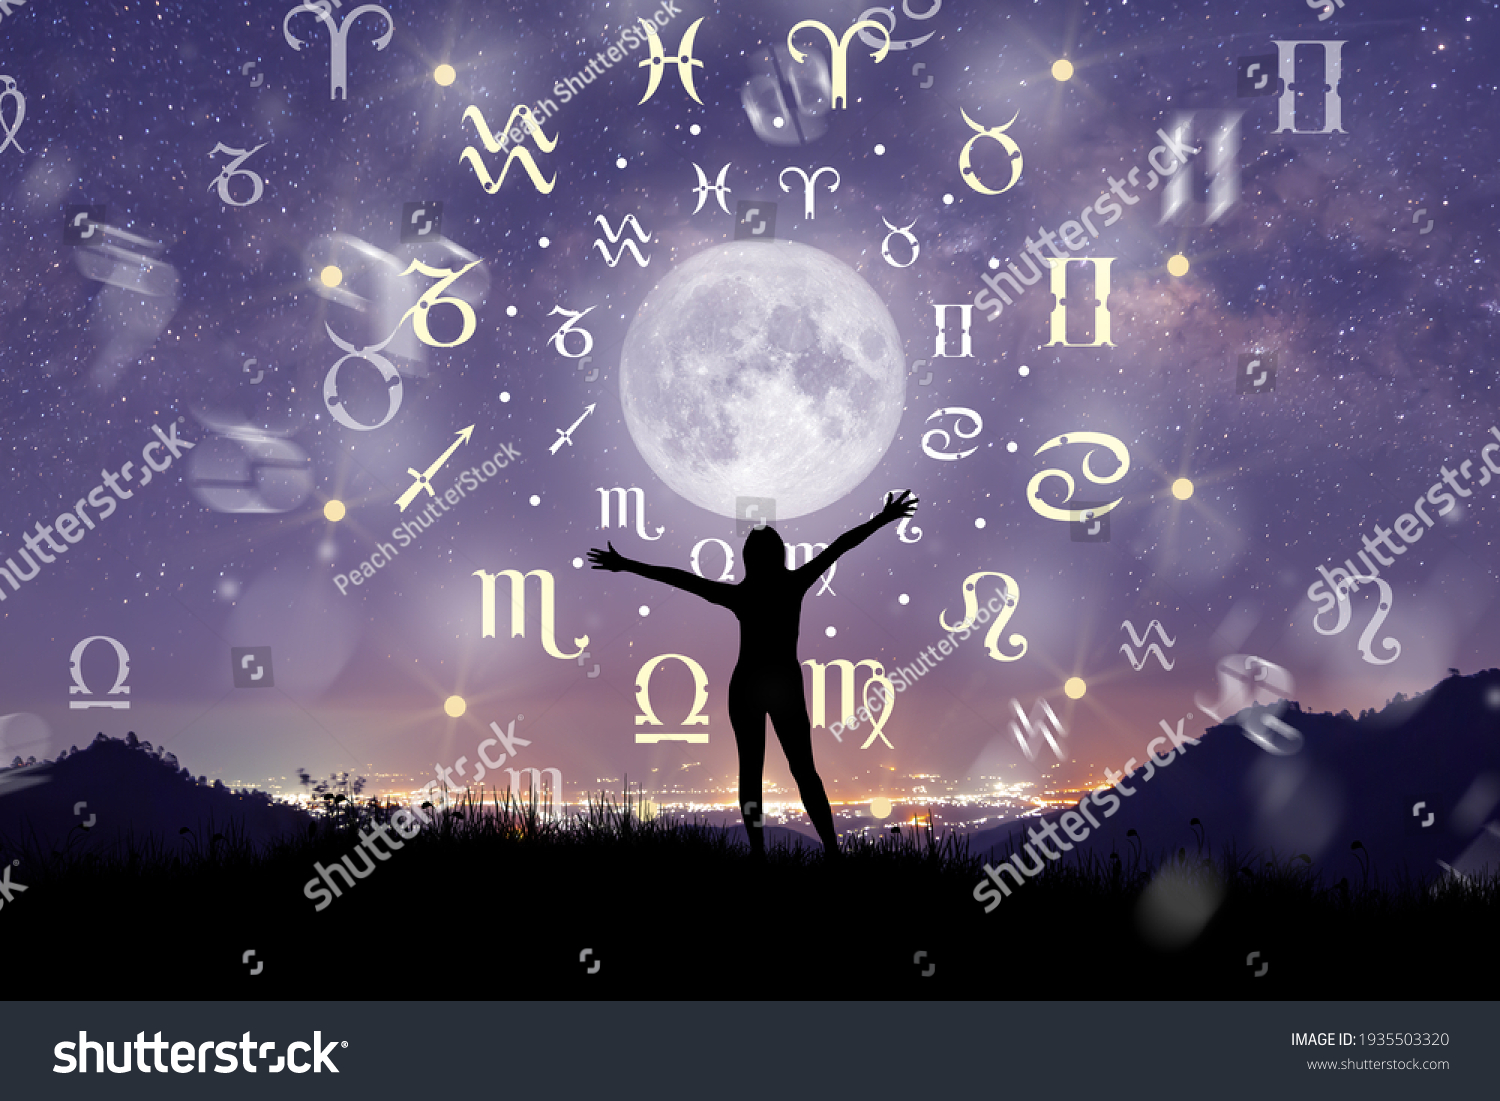 Astrological zodiac signs inside of horoscope circle. Illustration of Woman silhouette consulting the stars and moon over the zodiac wheel and milky way background. The power of the universe concept. #1935503320